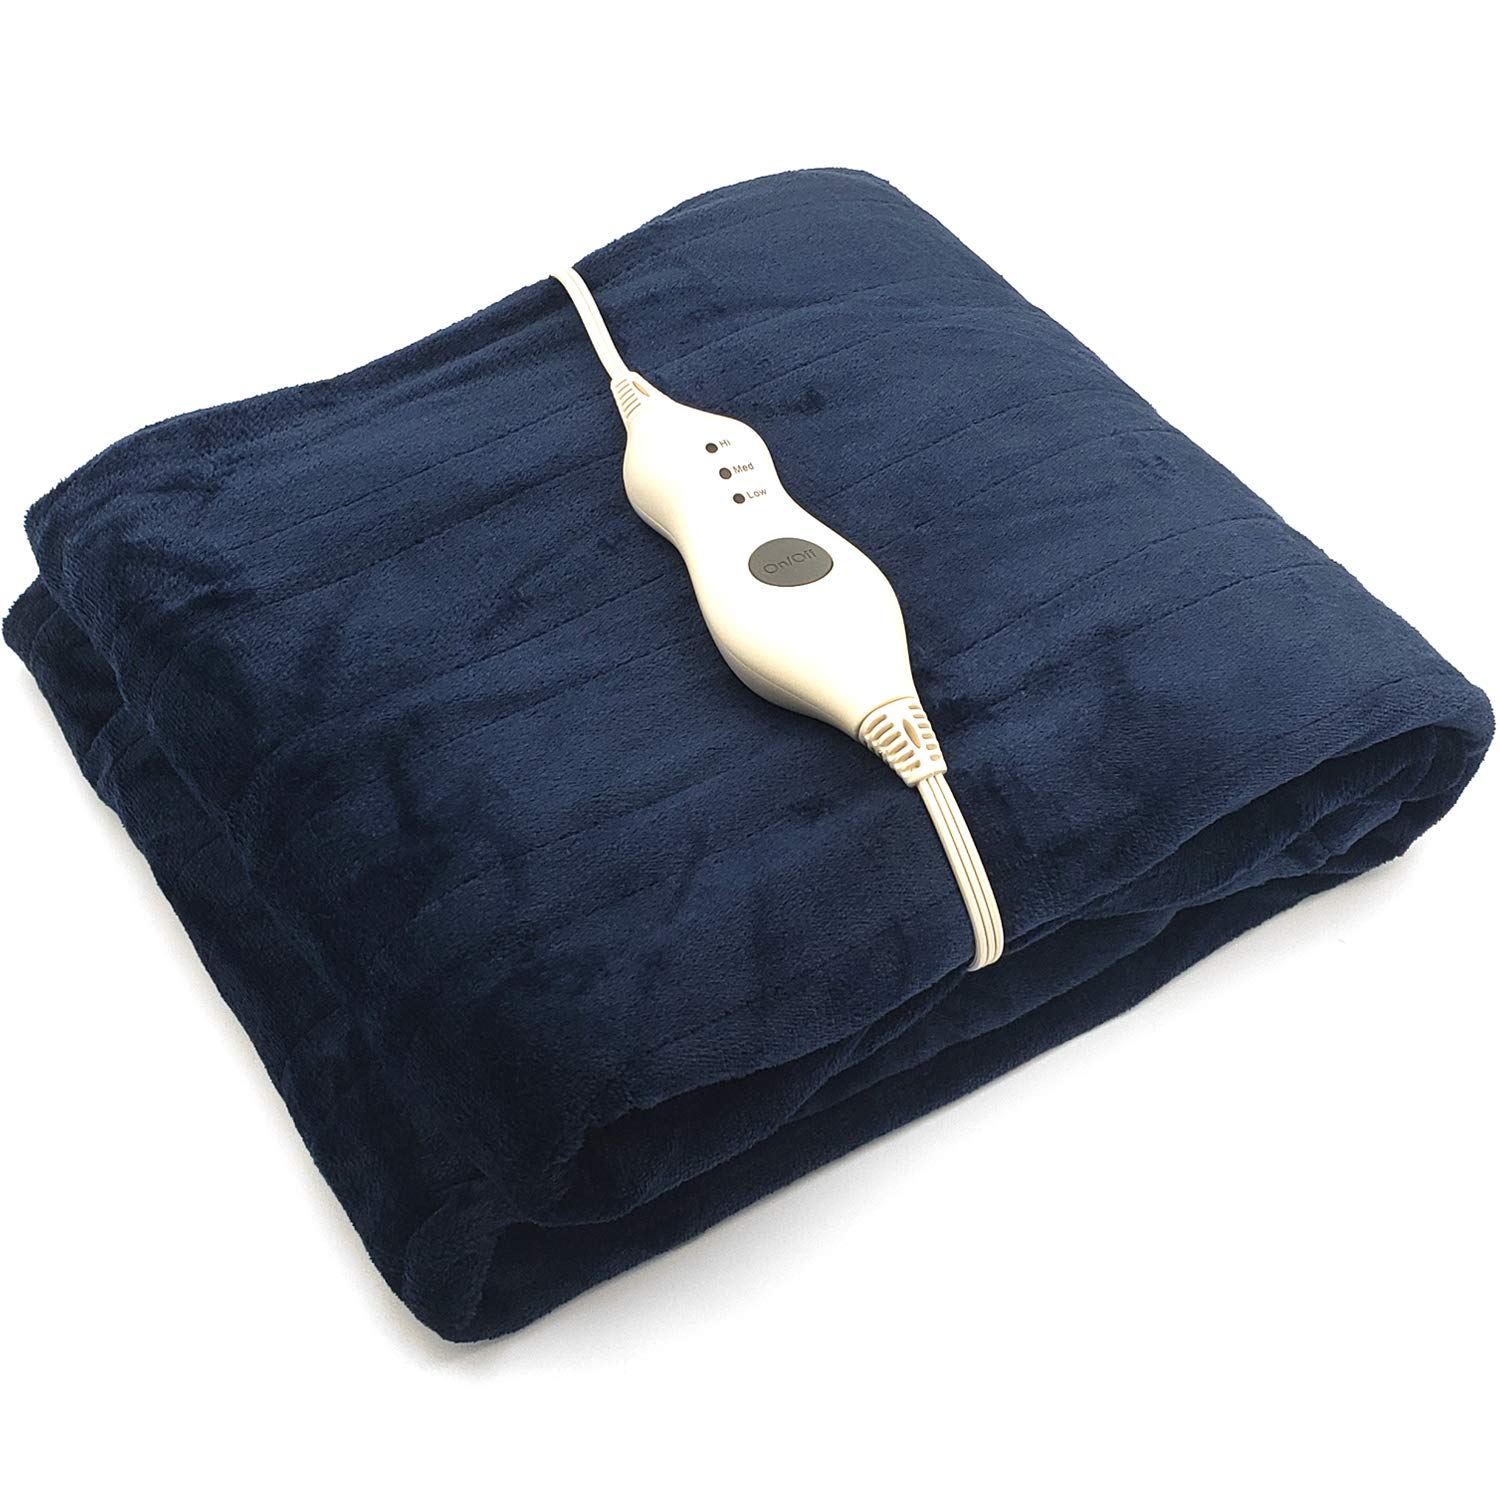 Dr Relief Electric Heated Throw Blanket Fleece with Controller, 4 Hours Auto Shut-Off, Fast Warming, Full-Body Comfort, Luxuriously Soft, Machine W...